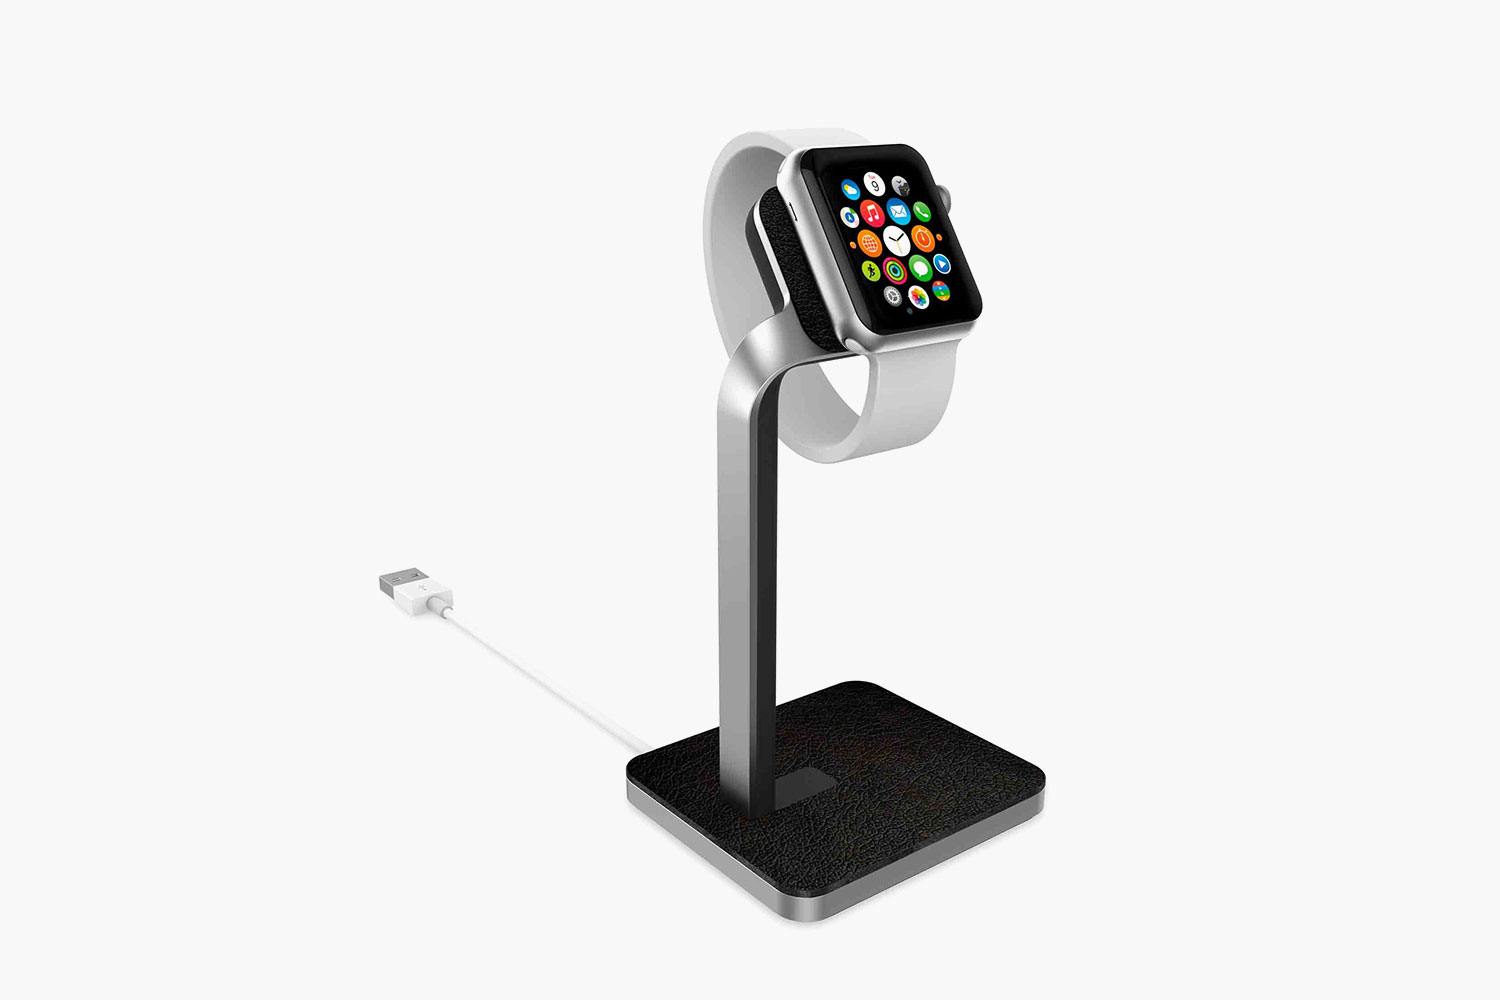 mophie-watch-dock-for-apple-watch-01